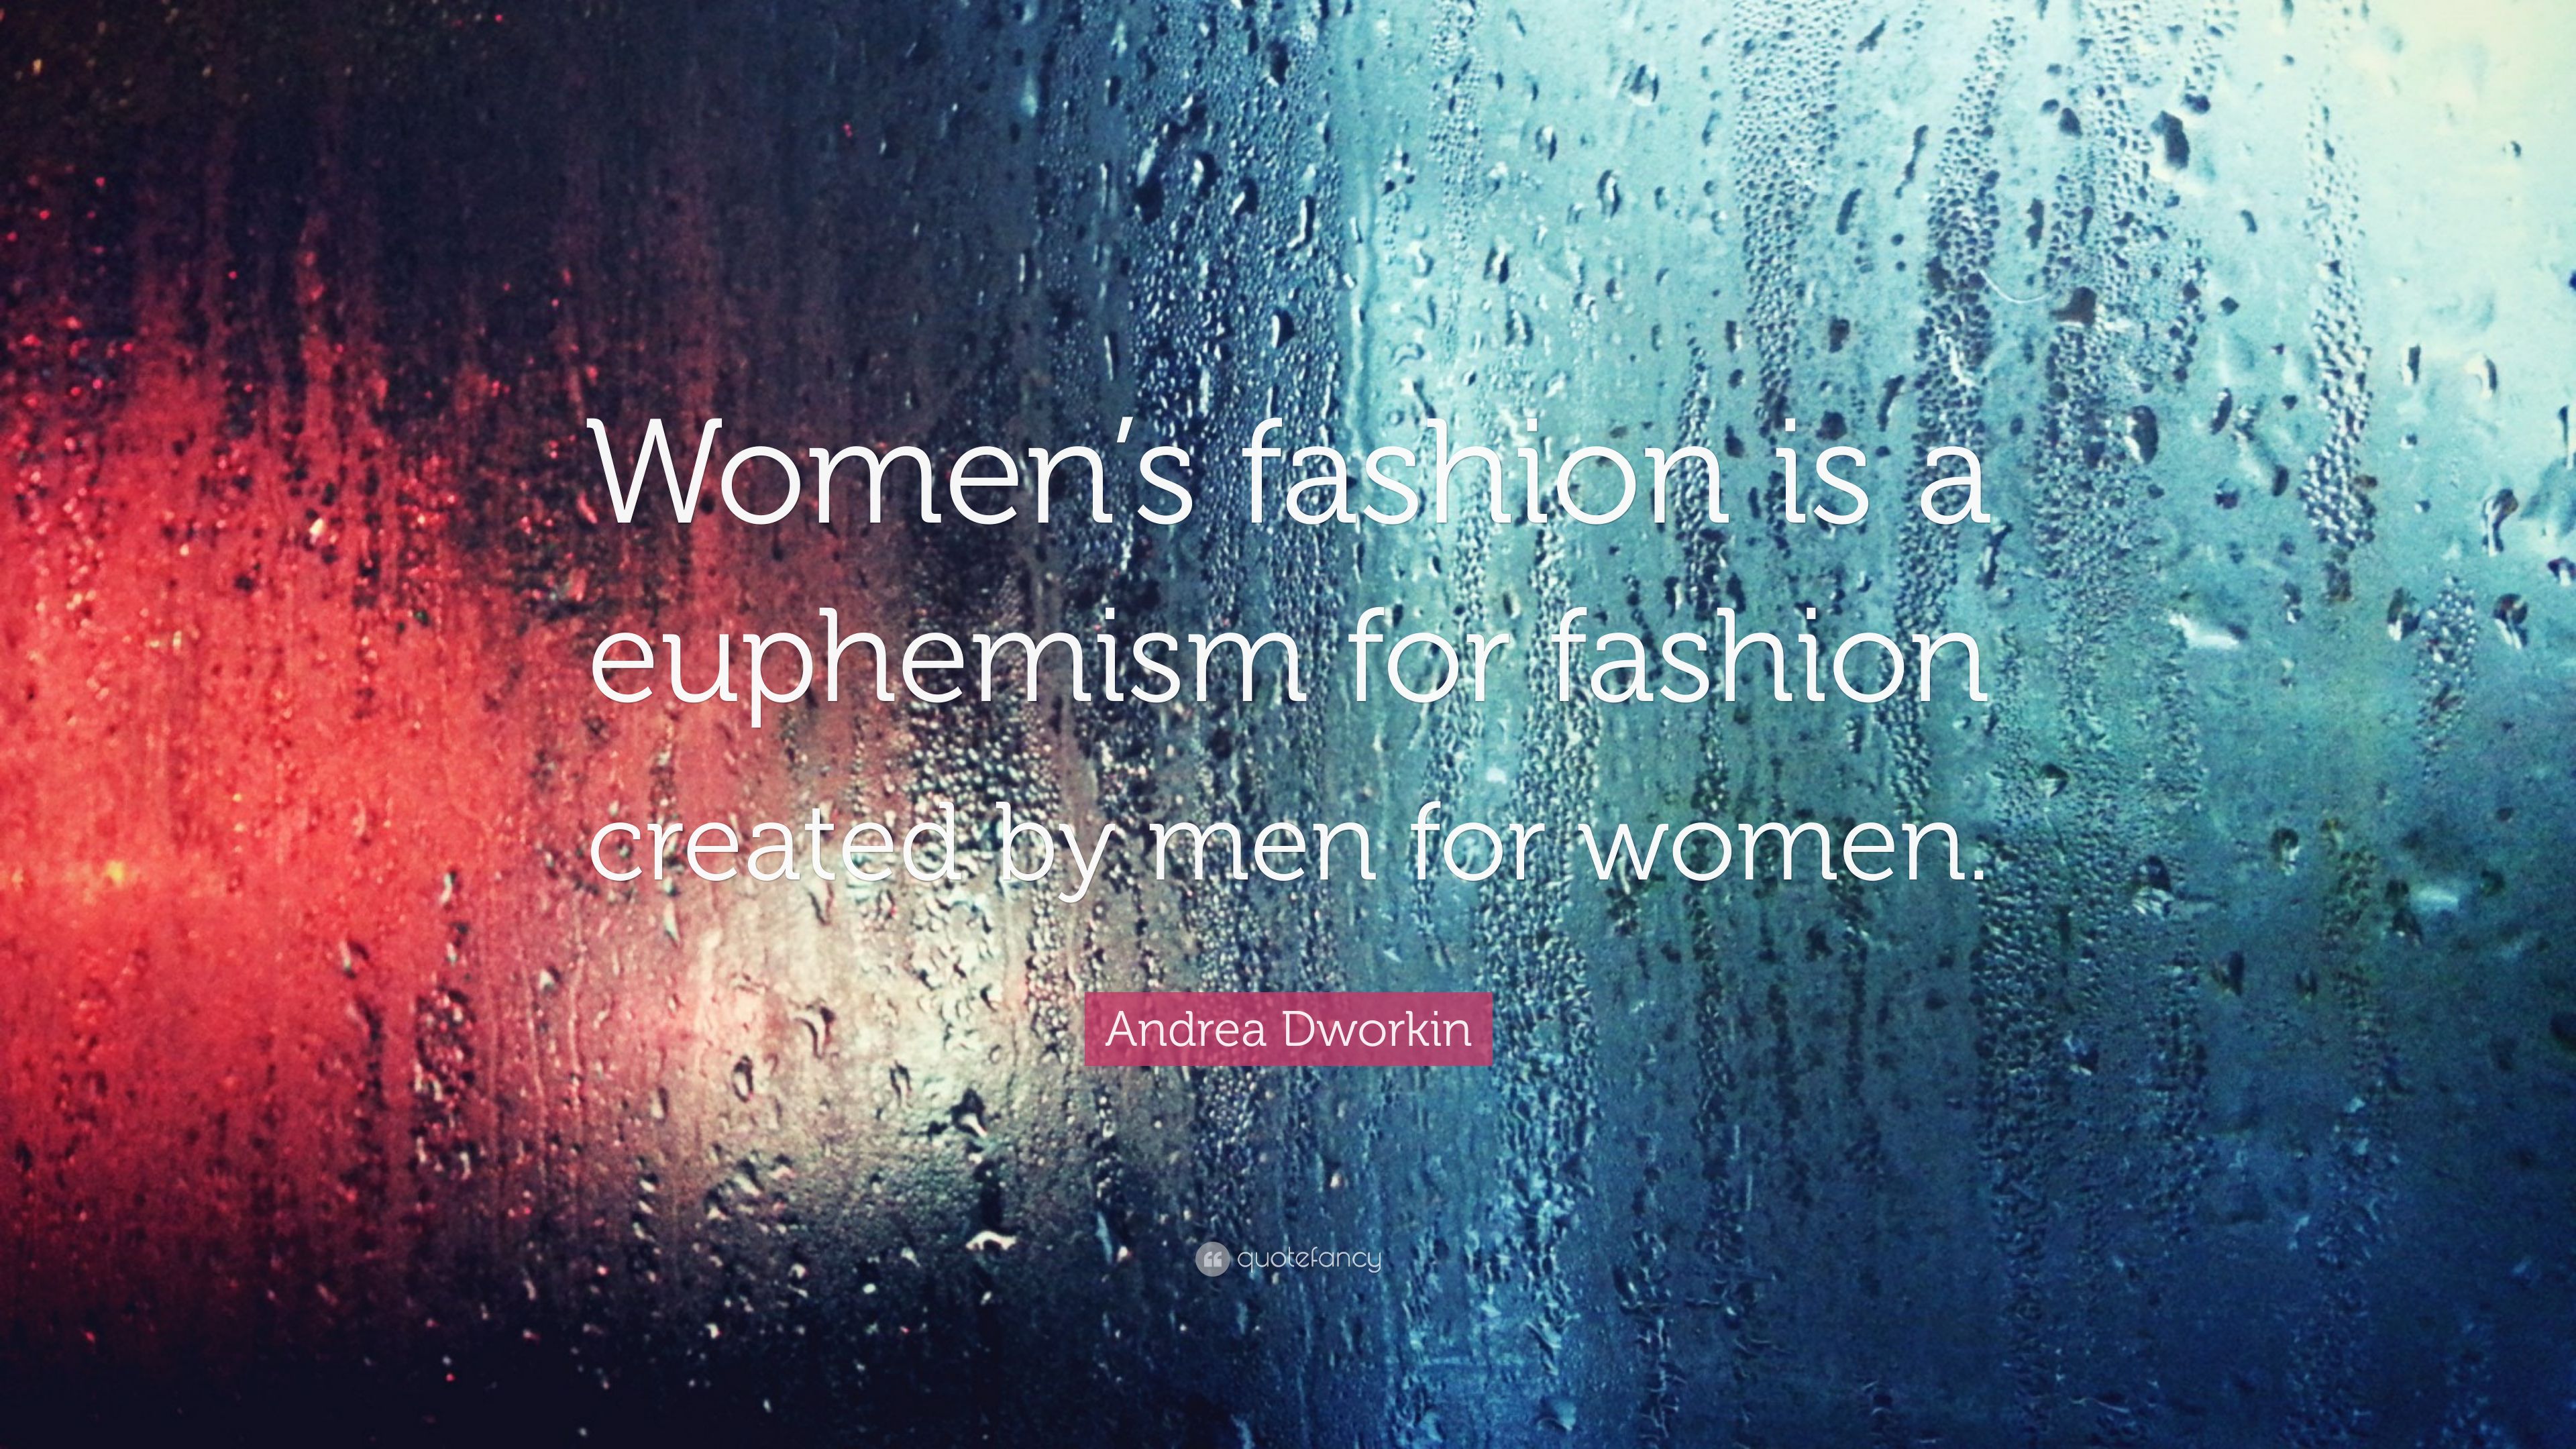 Andrea Dworkin Quote: “Women's fashion is a euphemism for fashion